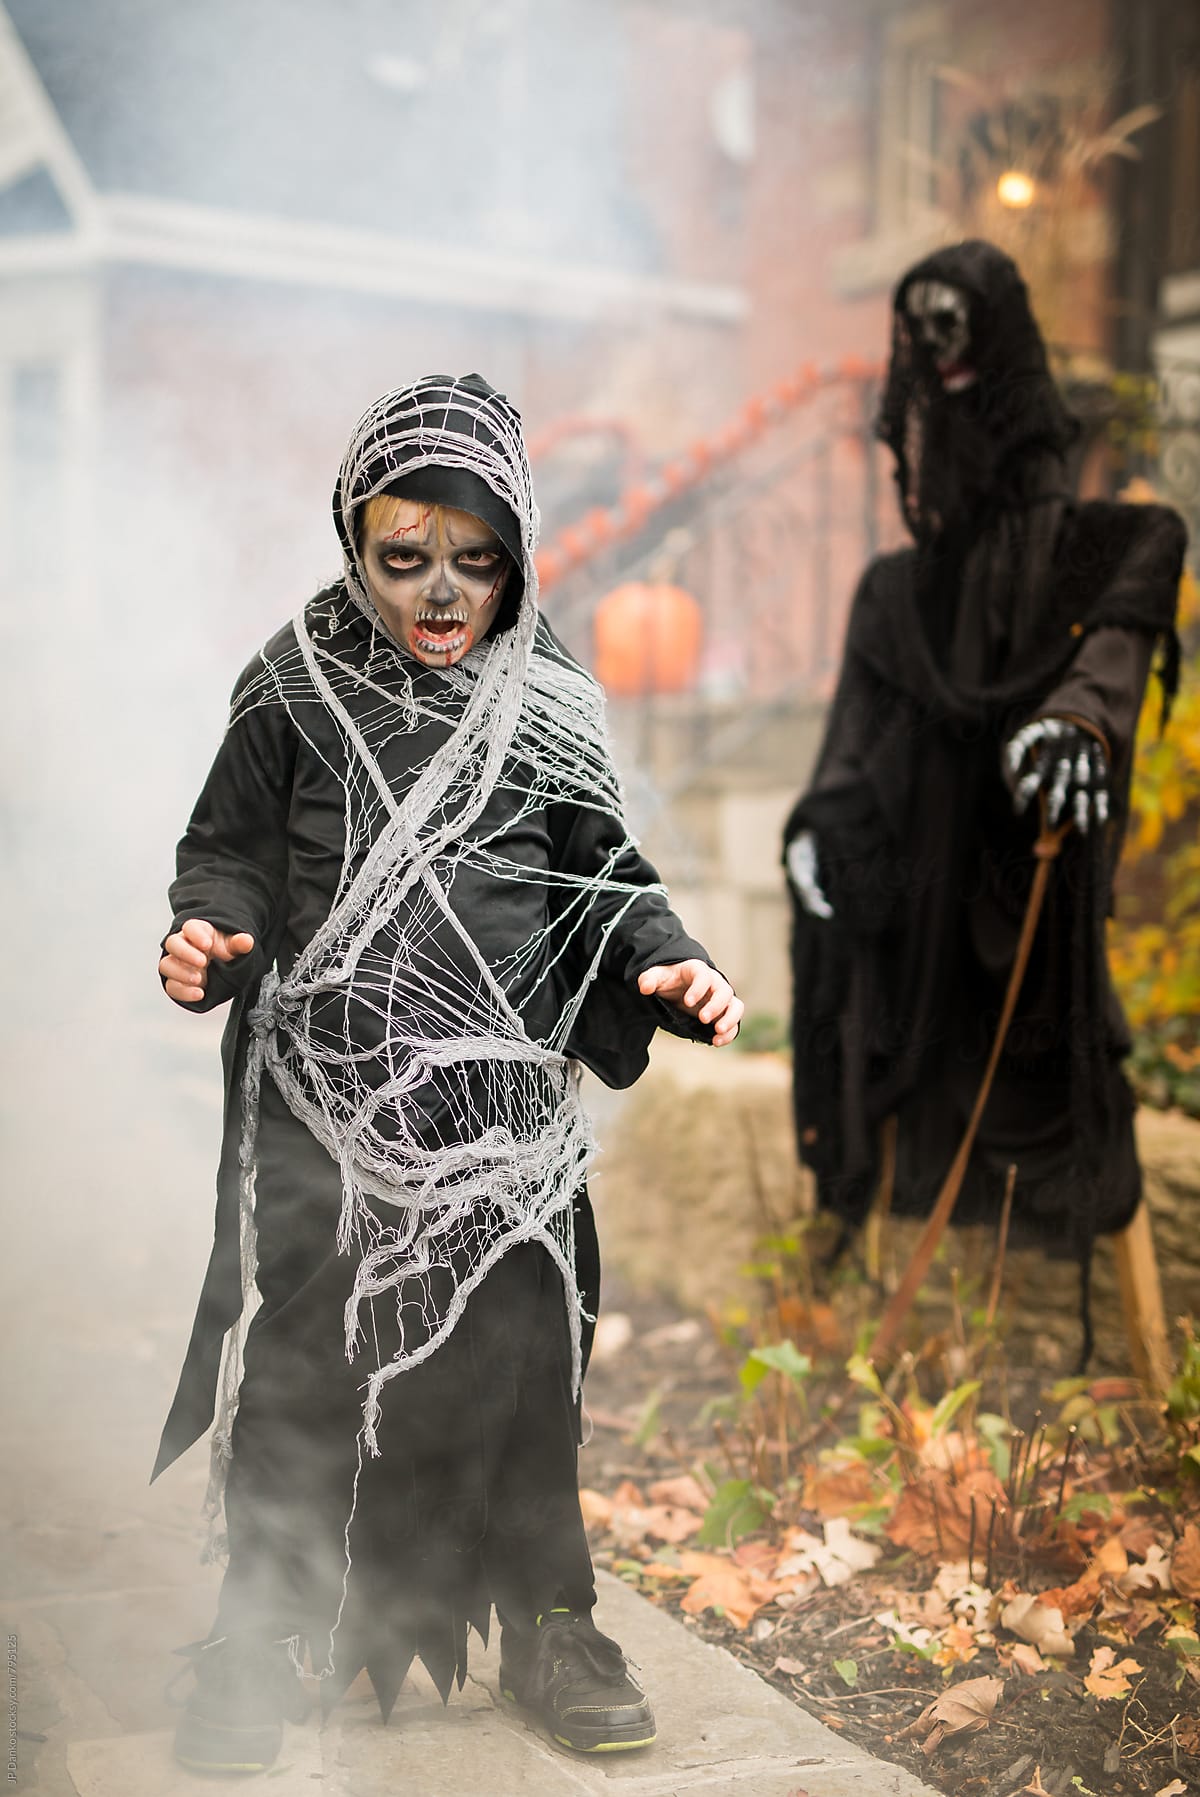 Scary Boy Dressed Up As Grim Reaper Halloween Costume Outdoors at House